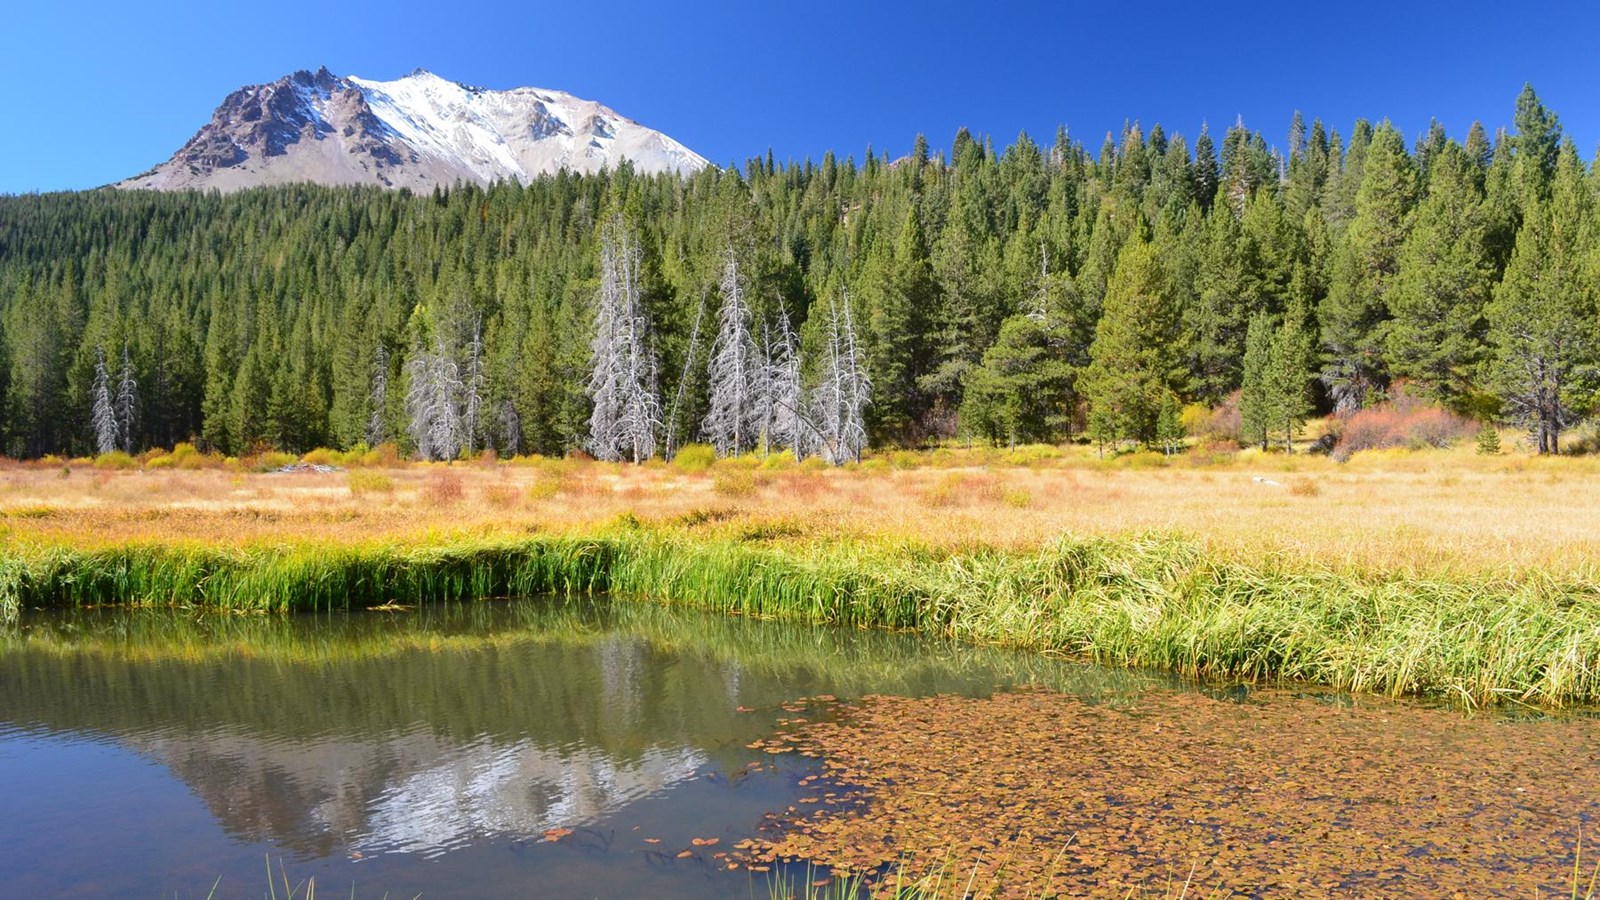 Fall colors in a meadow beneath a snow-dusted volcanic peak. Orange leaves float in a pool of water 